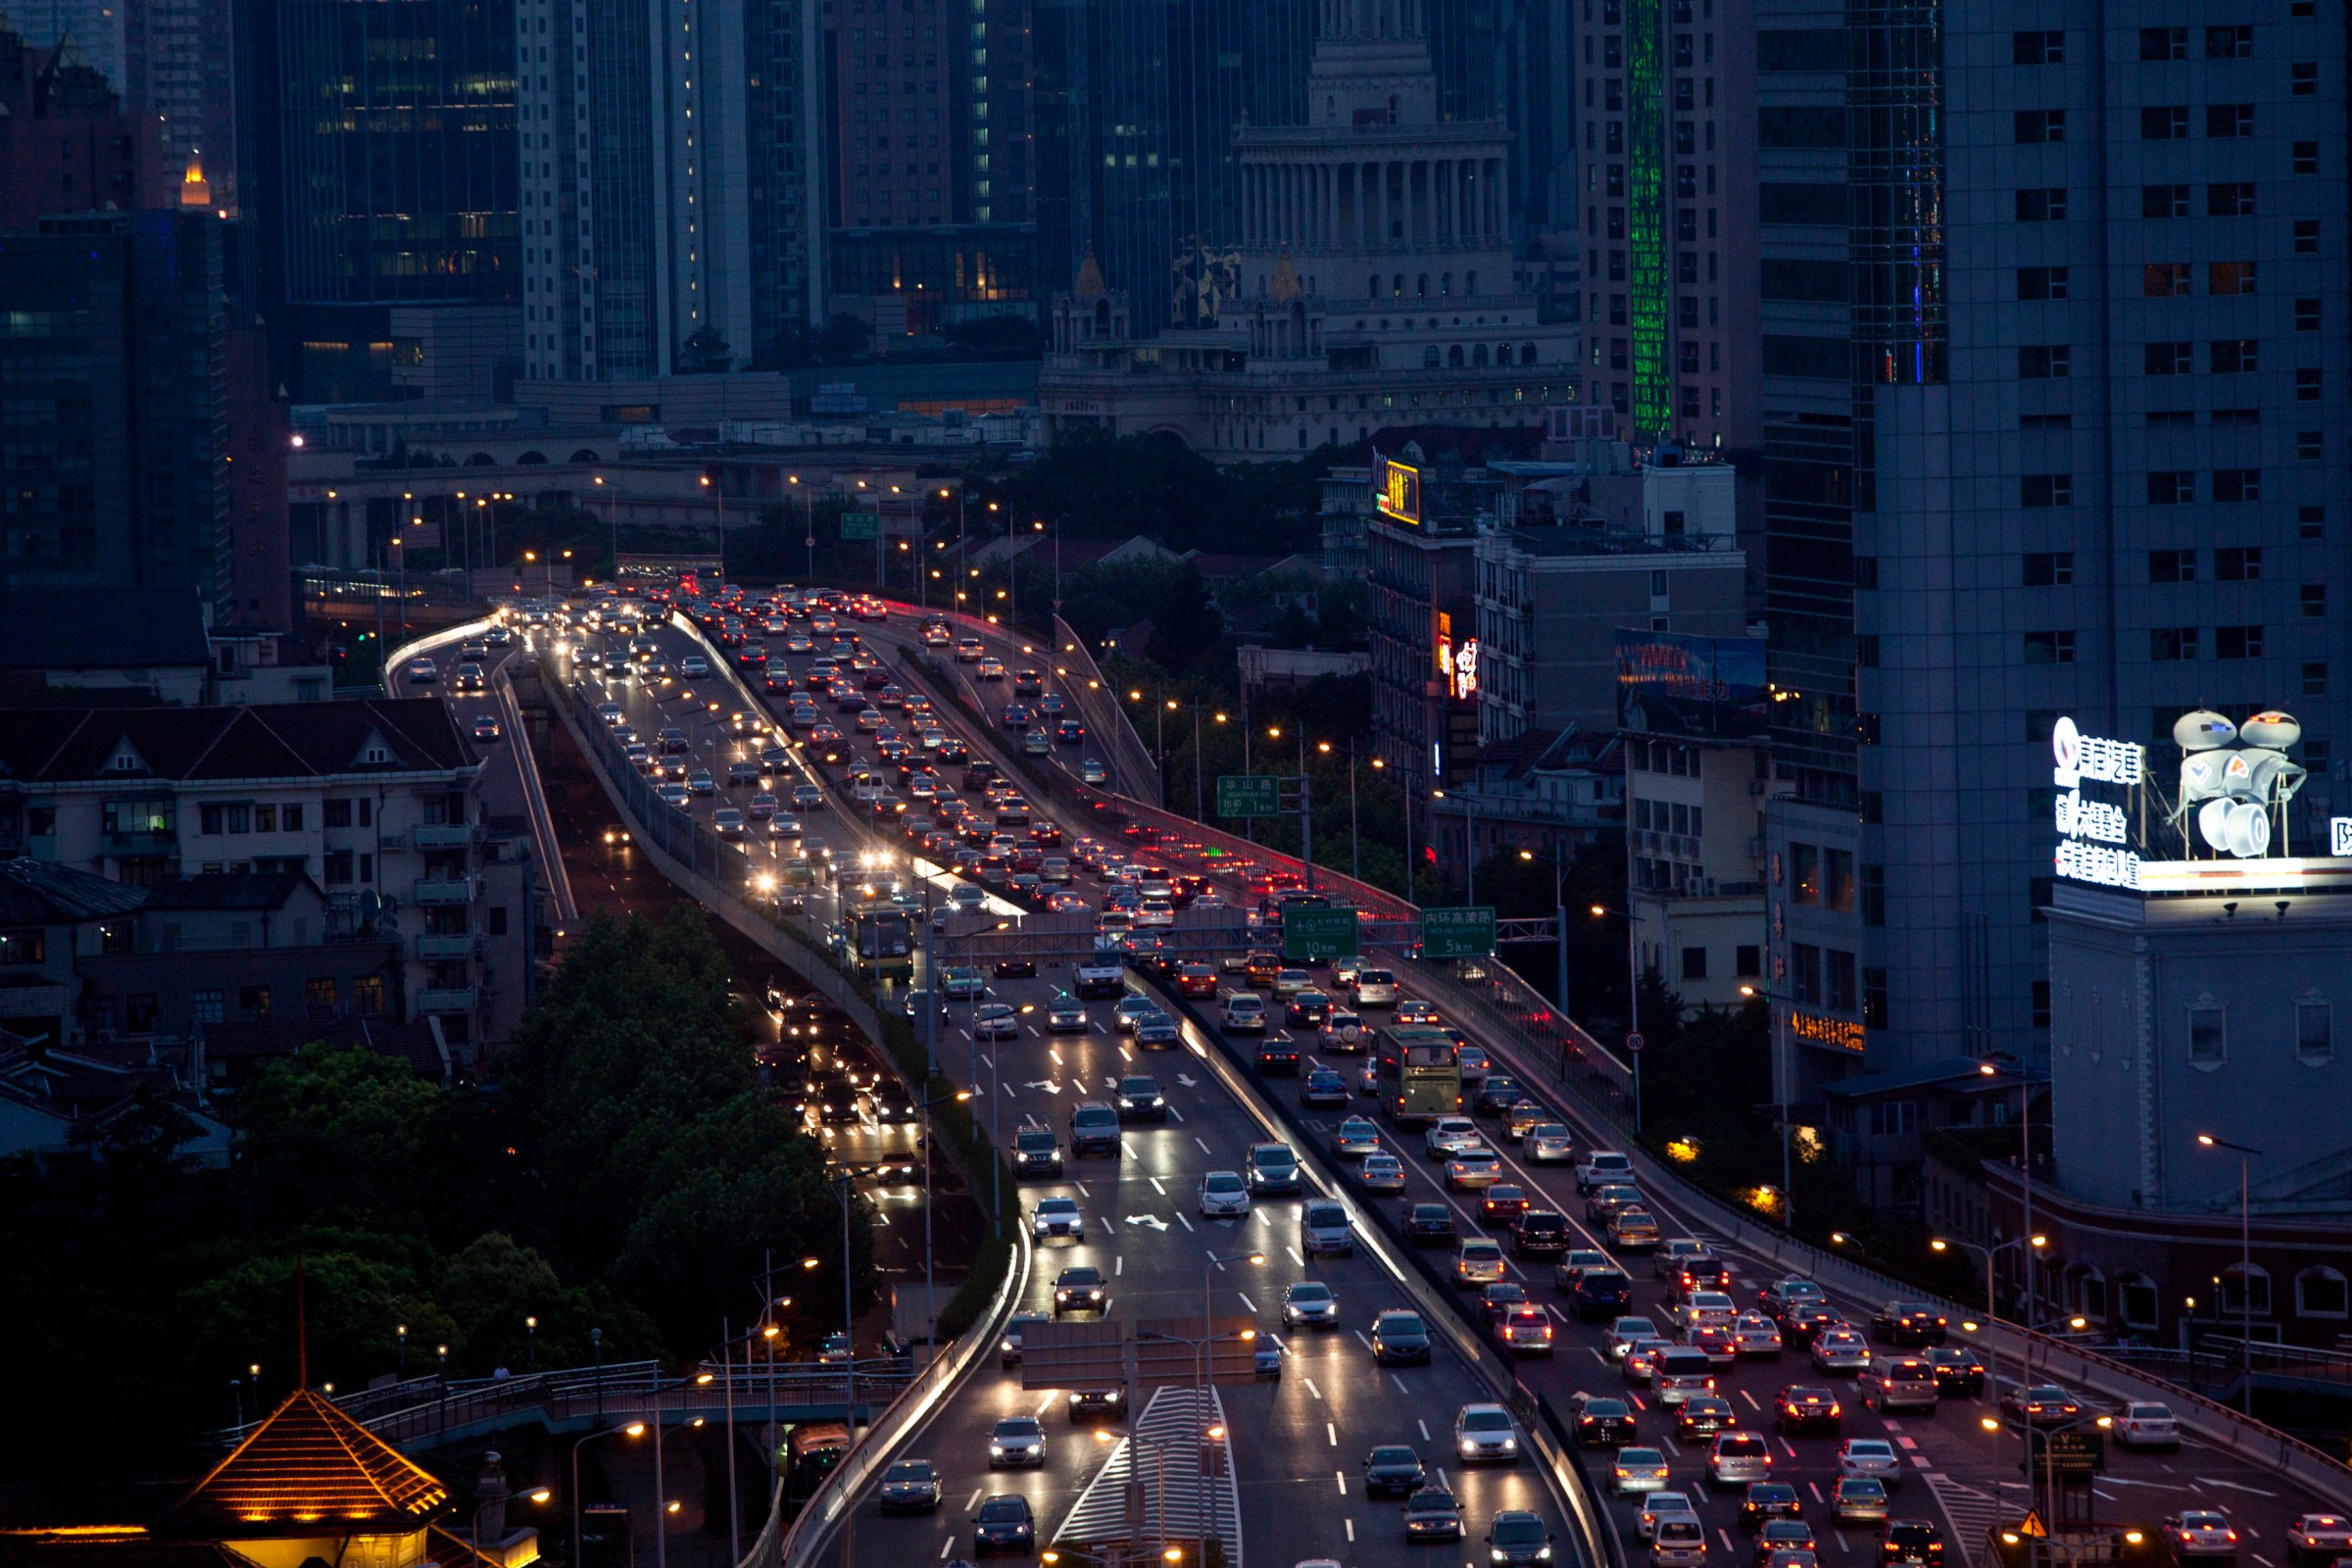 Lines of cars are pictured during a rush hour traffic jam in central Shanghai July 11, 2013.